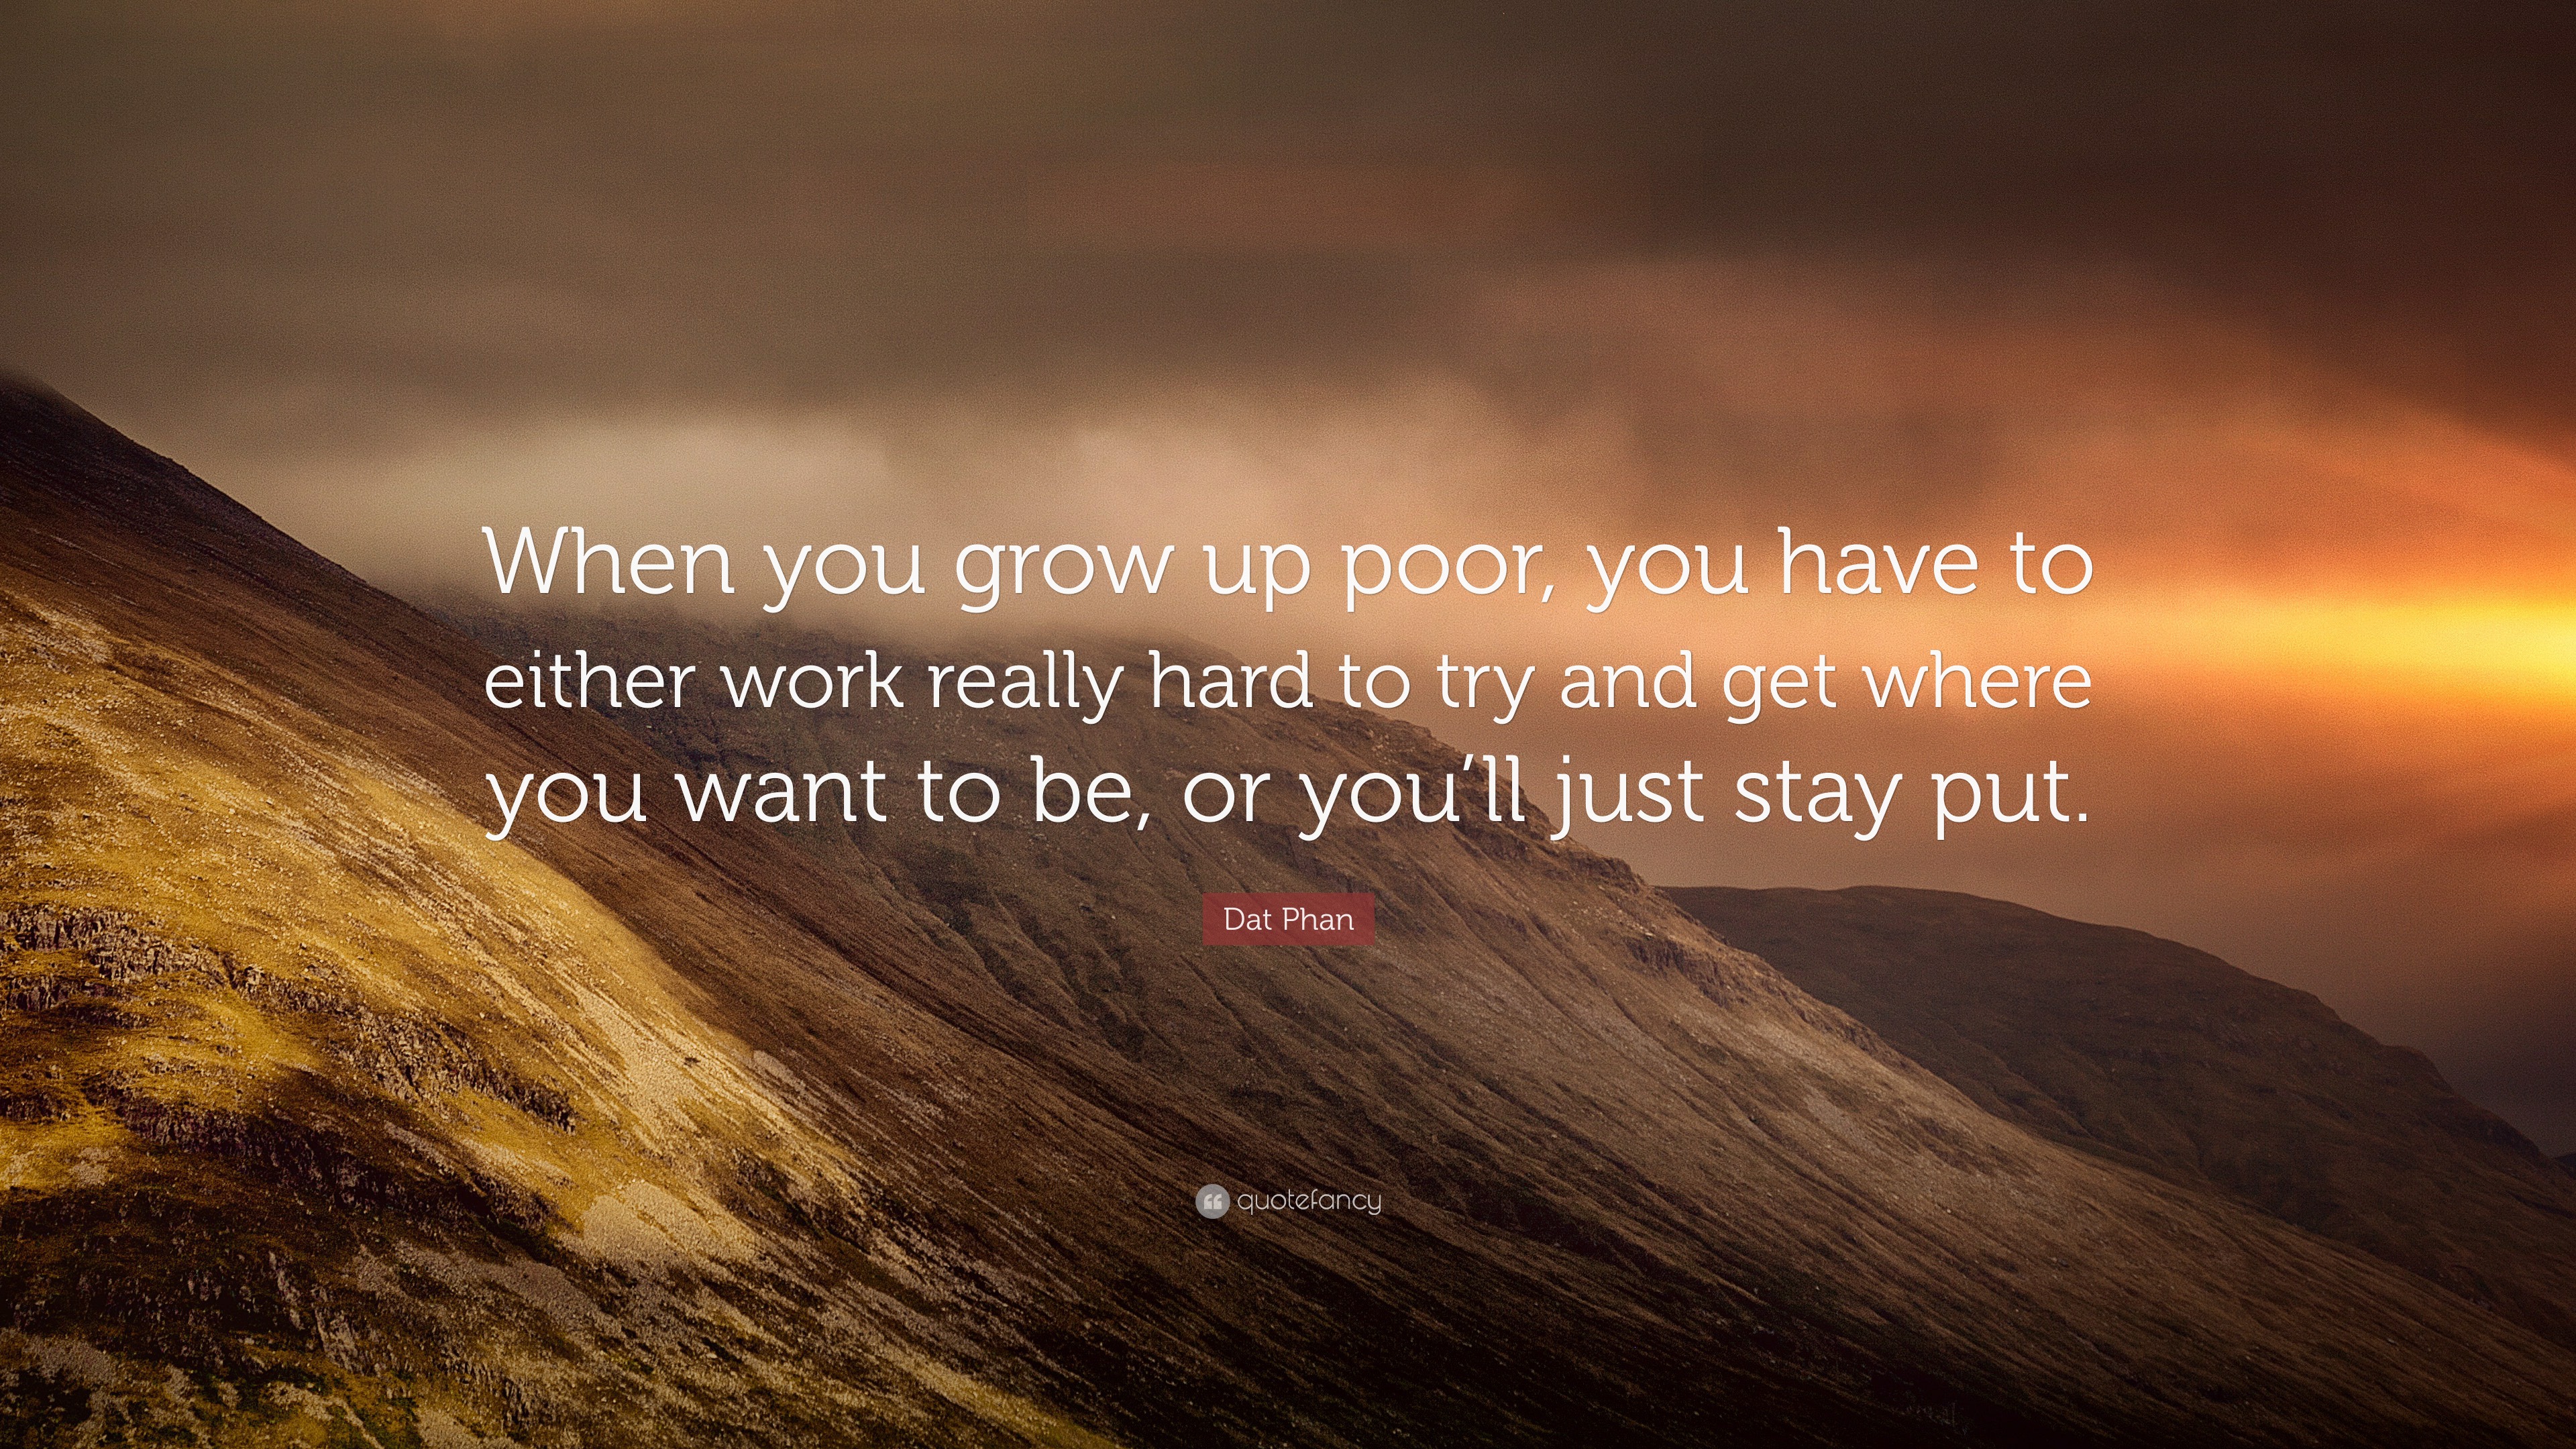 growing up poor gave me a good work ethic